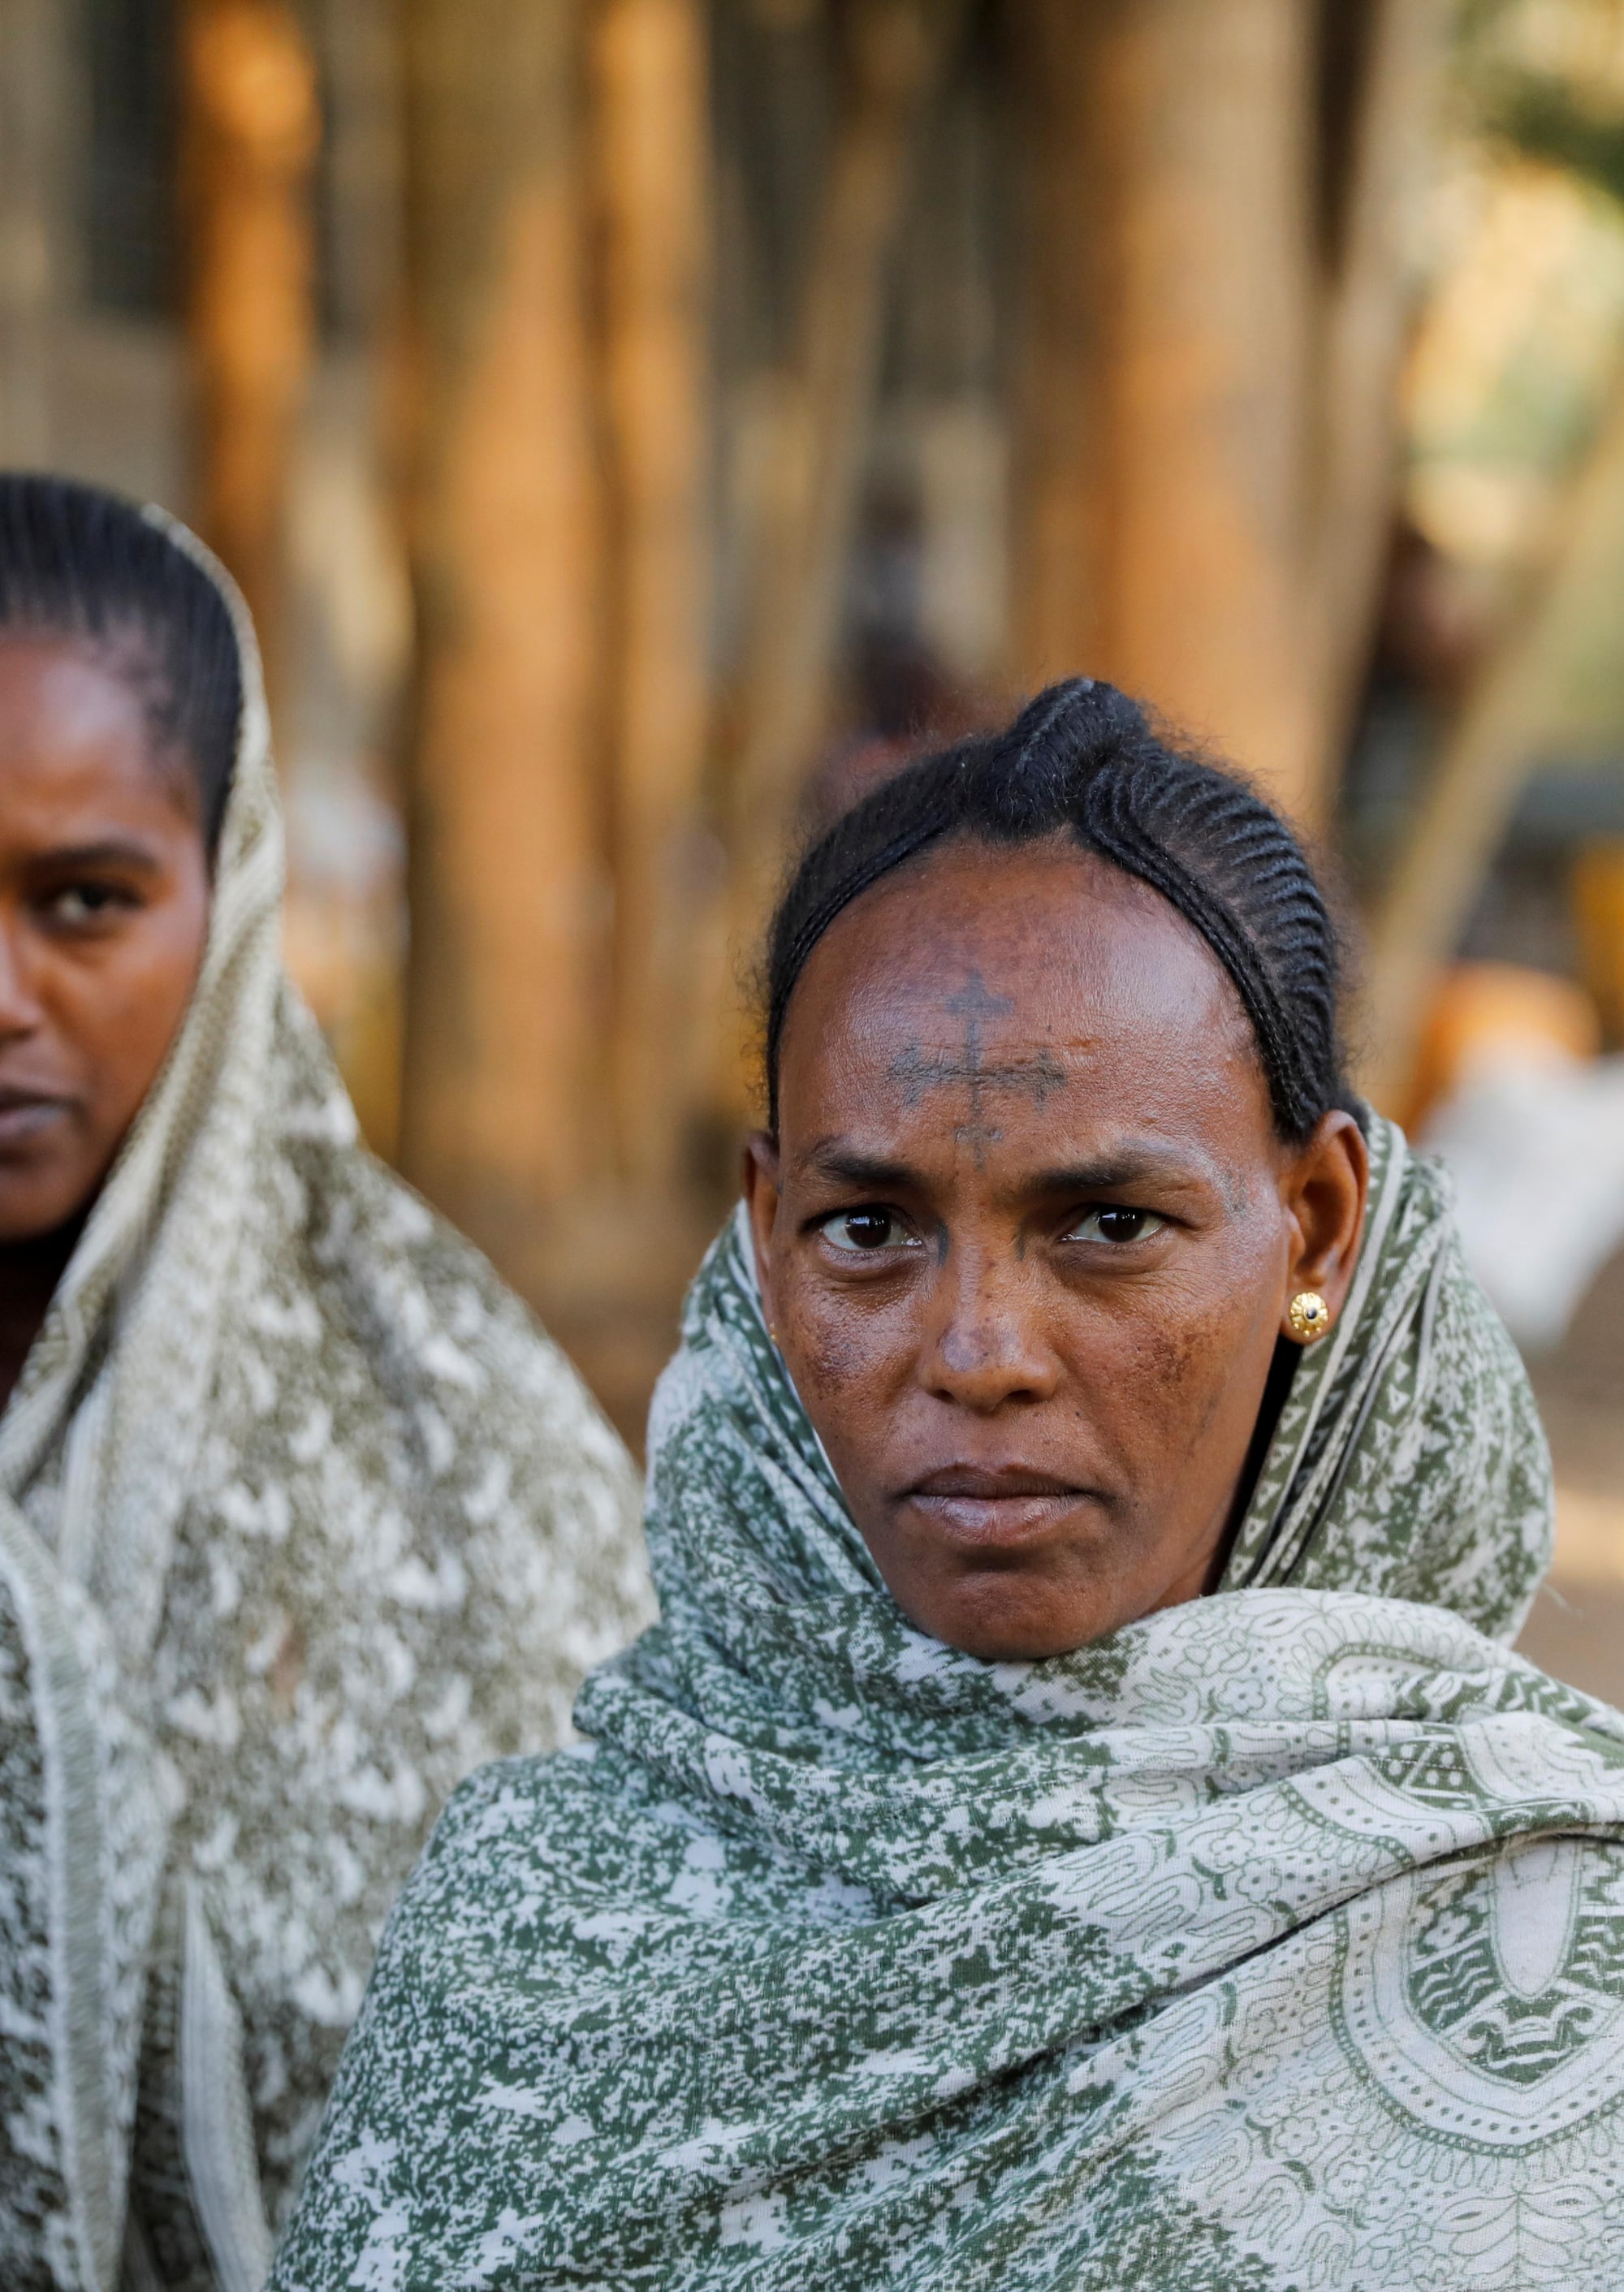 Insight You dont belong land dispute drives new exodus in Ethiopias Tigray